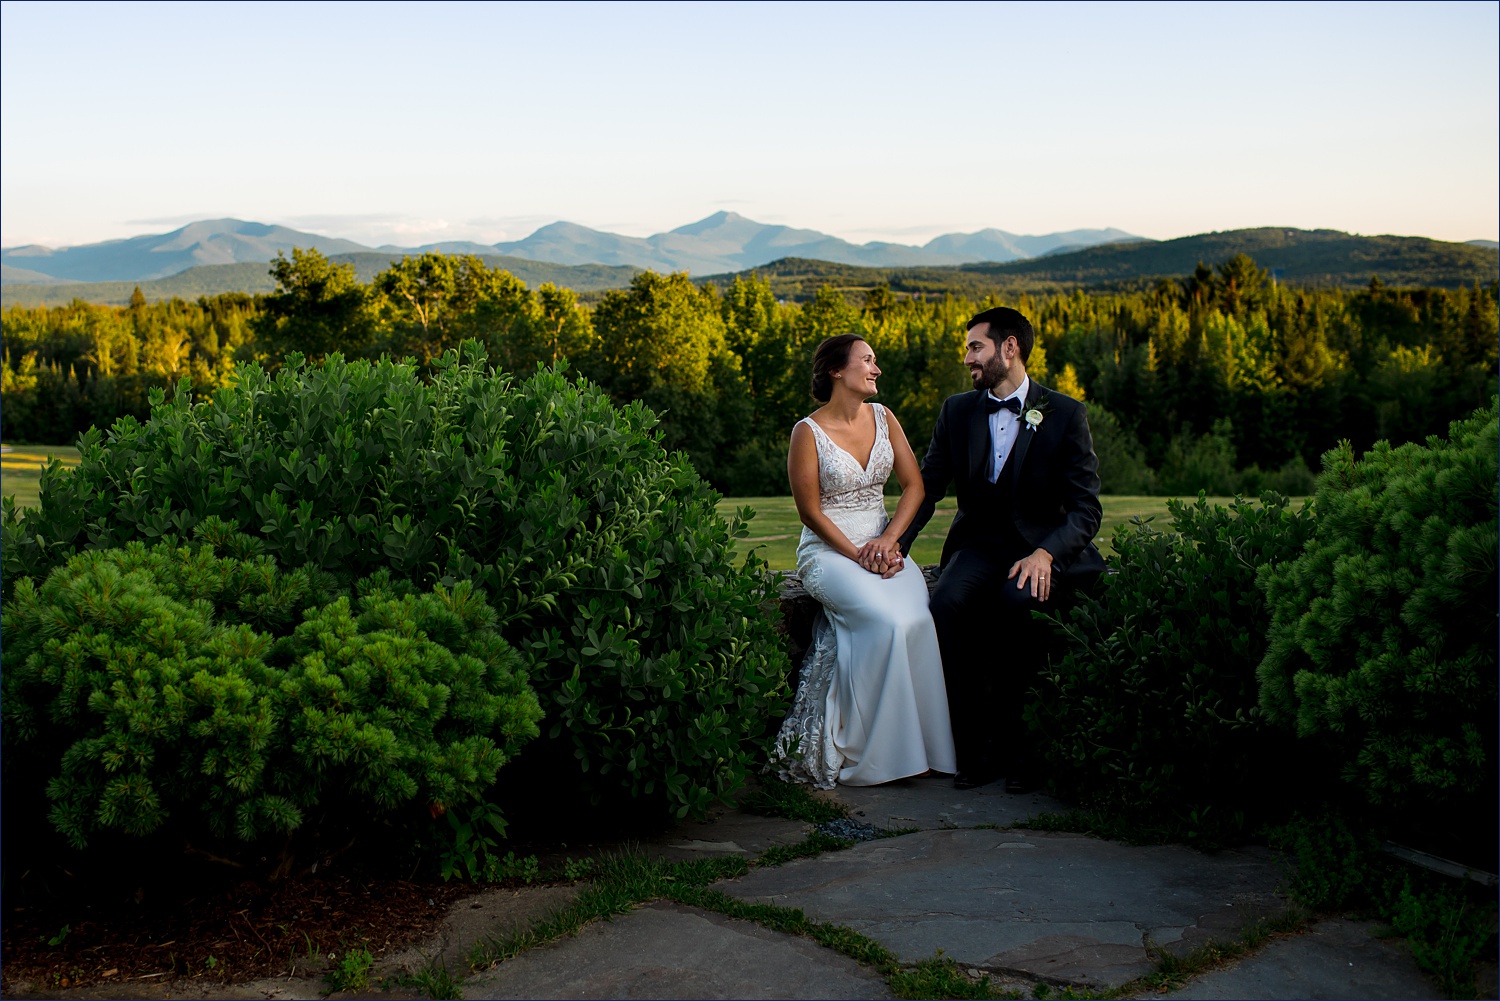 Smiles from the newly married couple in the White Mountains of New Hampshire